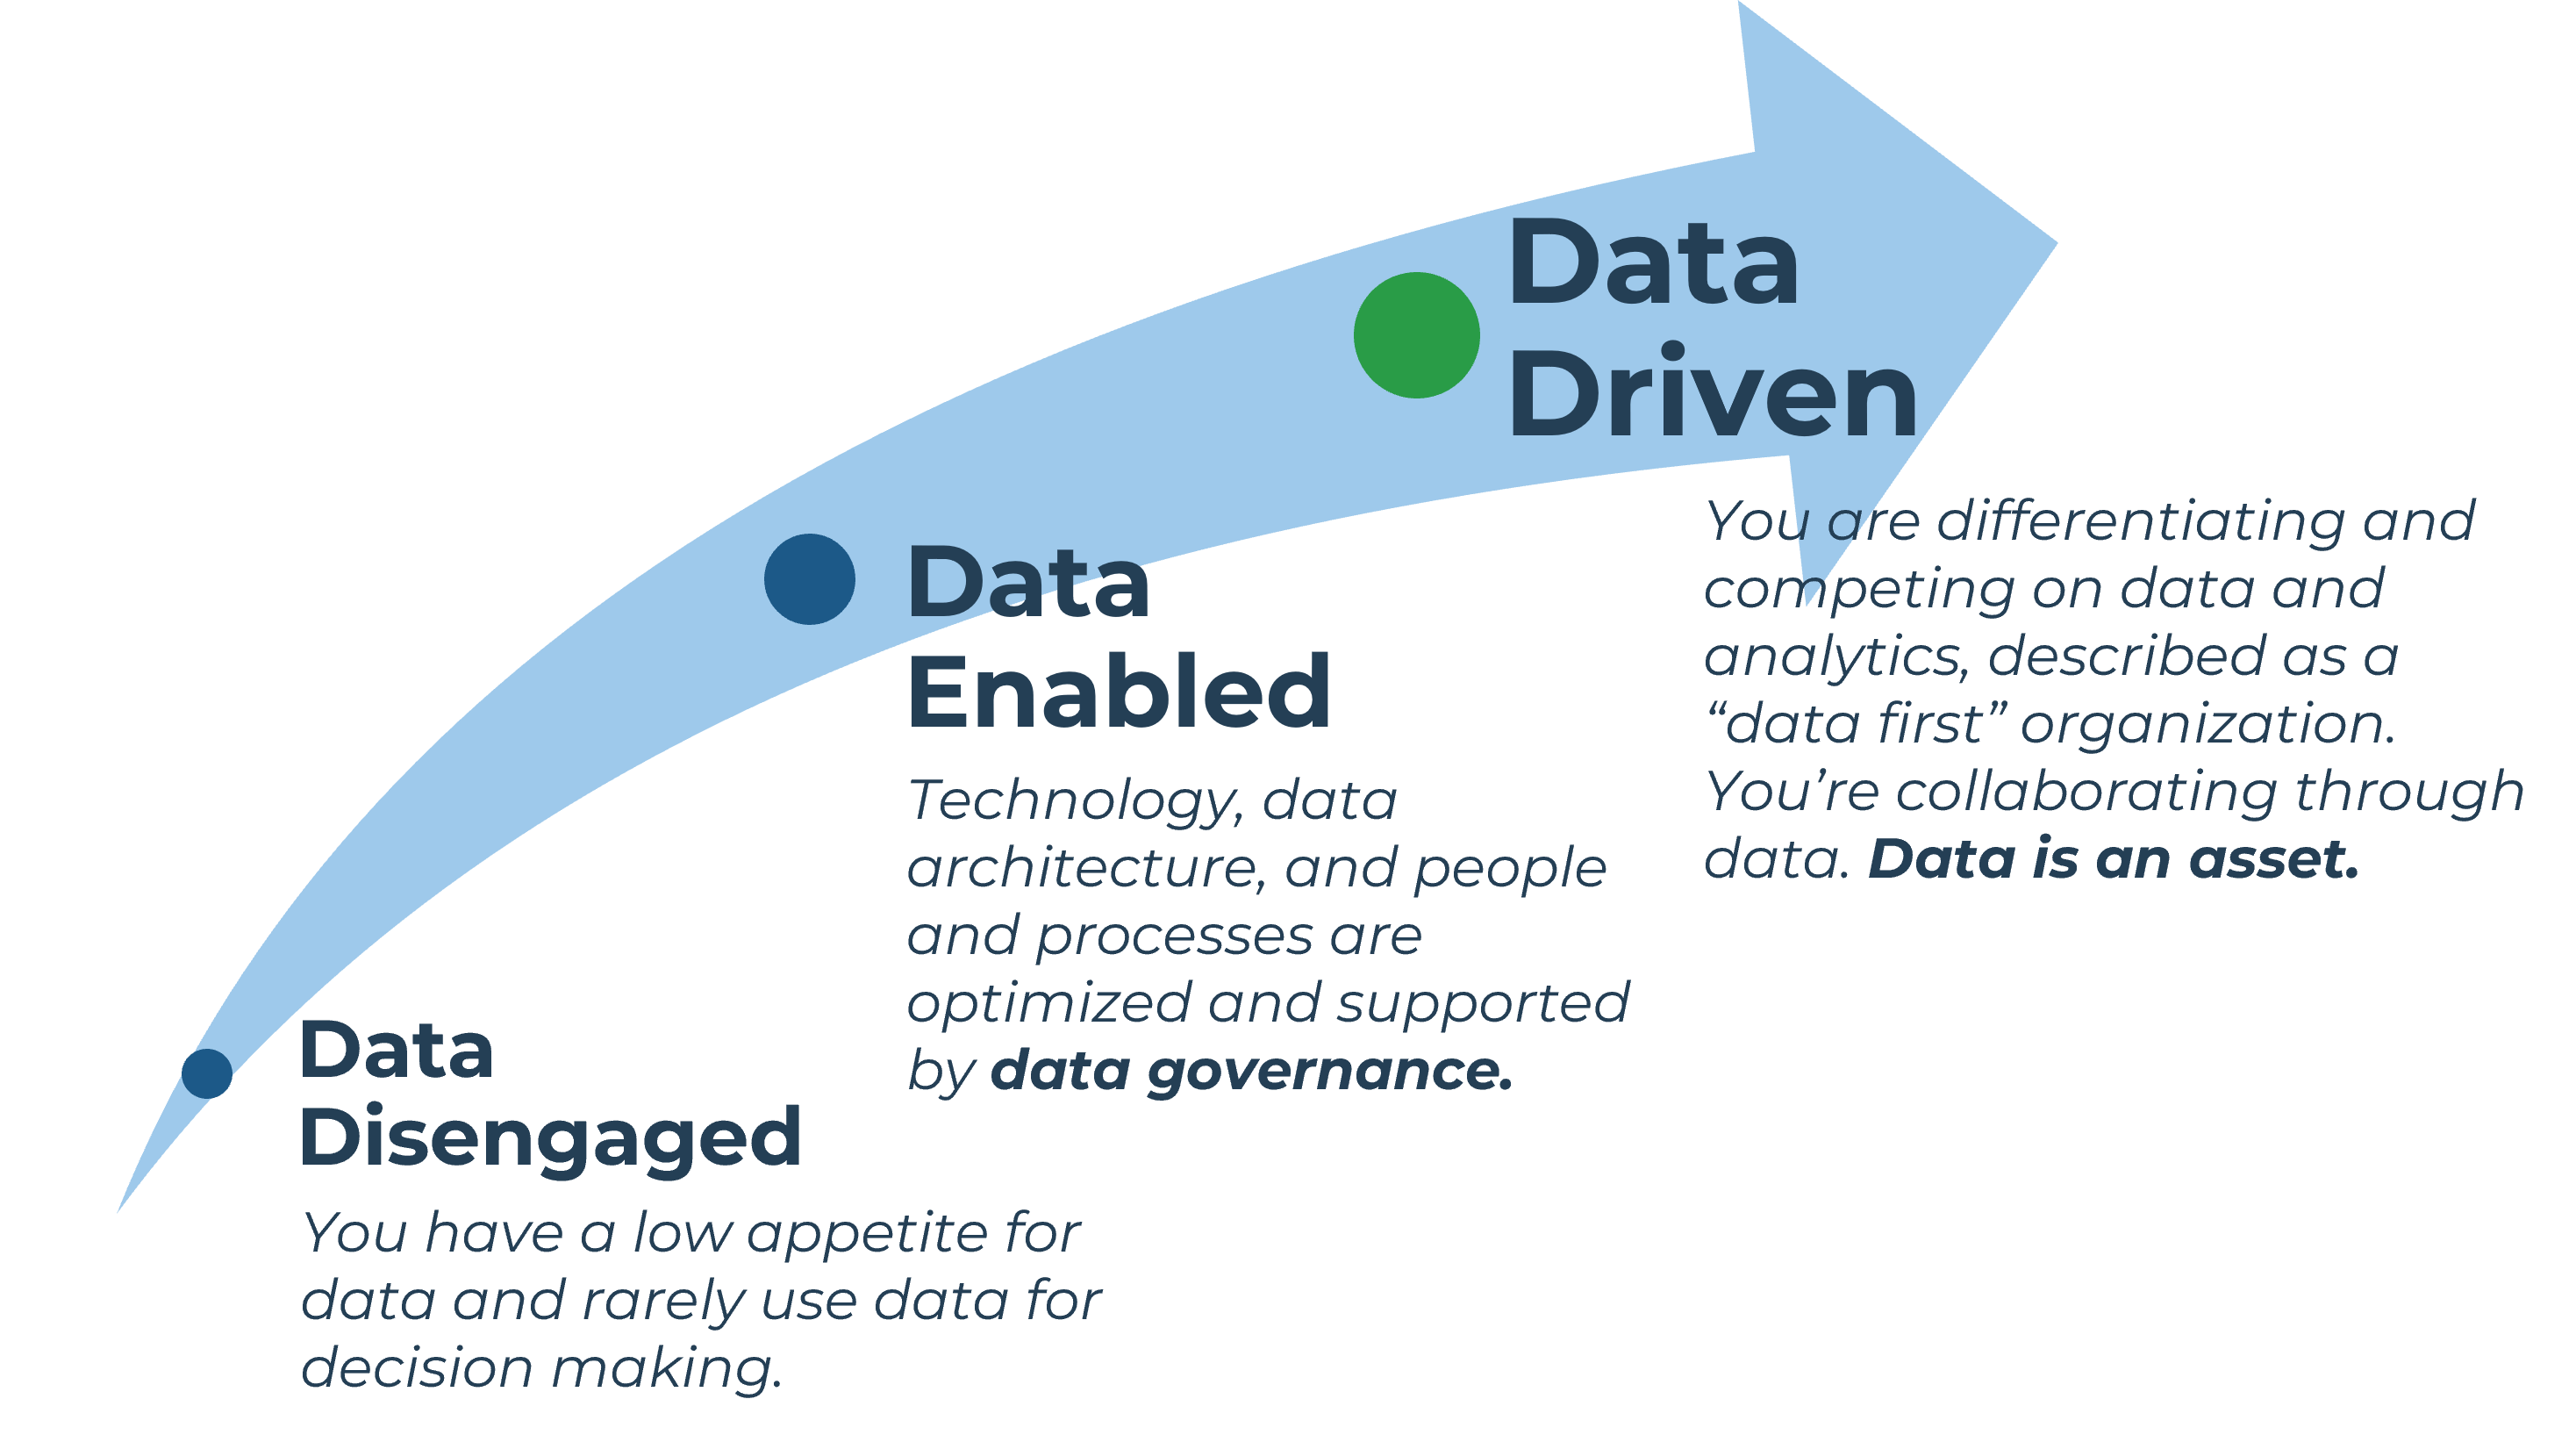 Diagram of 'The Data Economy' with three points on an arrow. 'Data Disengaged: You have a low appetite for data and rarely use data for decision making.' 'Data Enabled: Technology, data architecture, and people and processes are optimized and supported by data governance.' 'Data Driven: You are differentiating and competing on data and analytics, described as a “data first” organization. You’re collaborating through data. Data is an asset.'